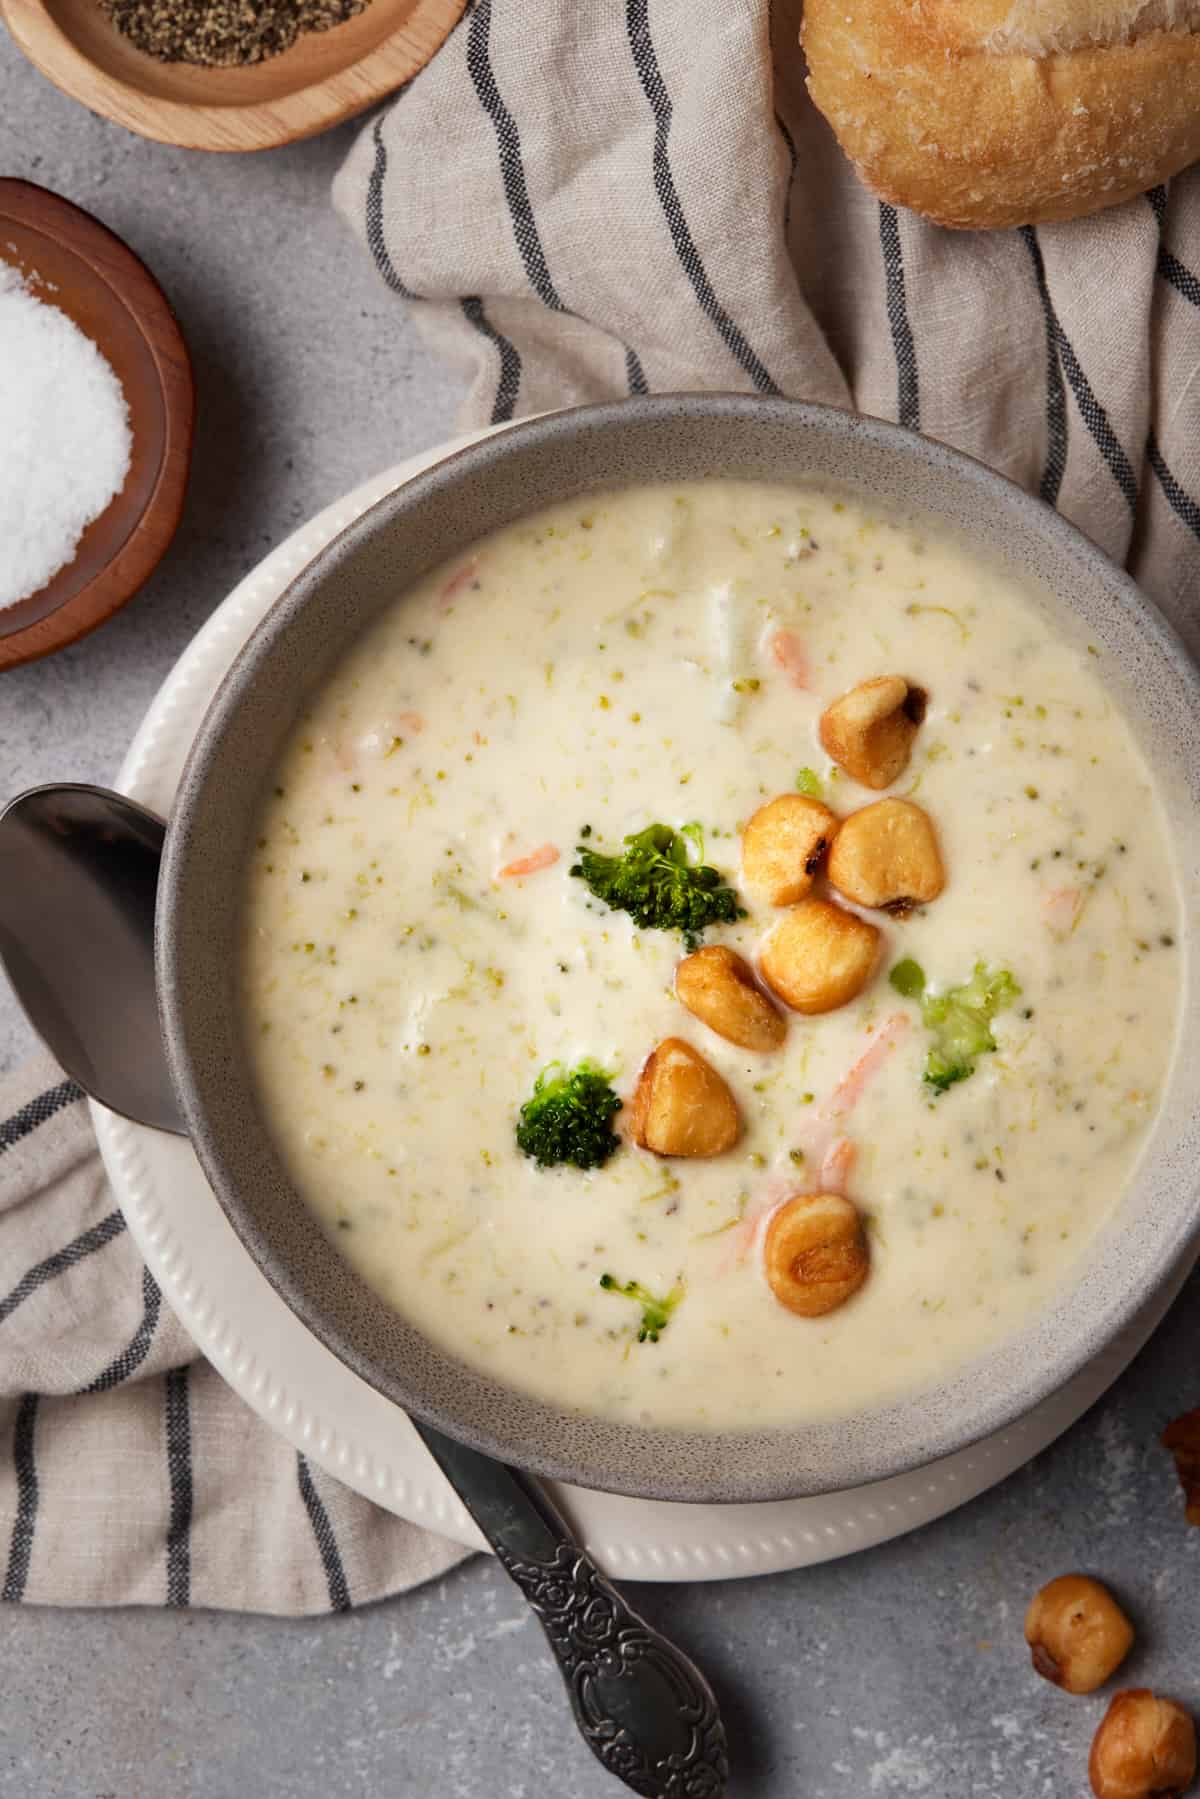 Bowl filled with soup and topped with corn nuts and broccoli.